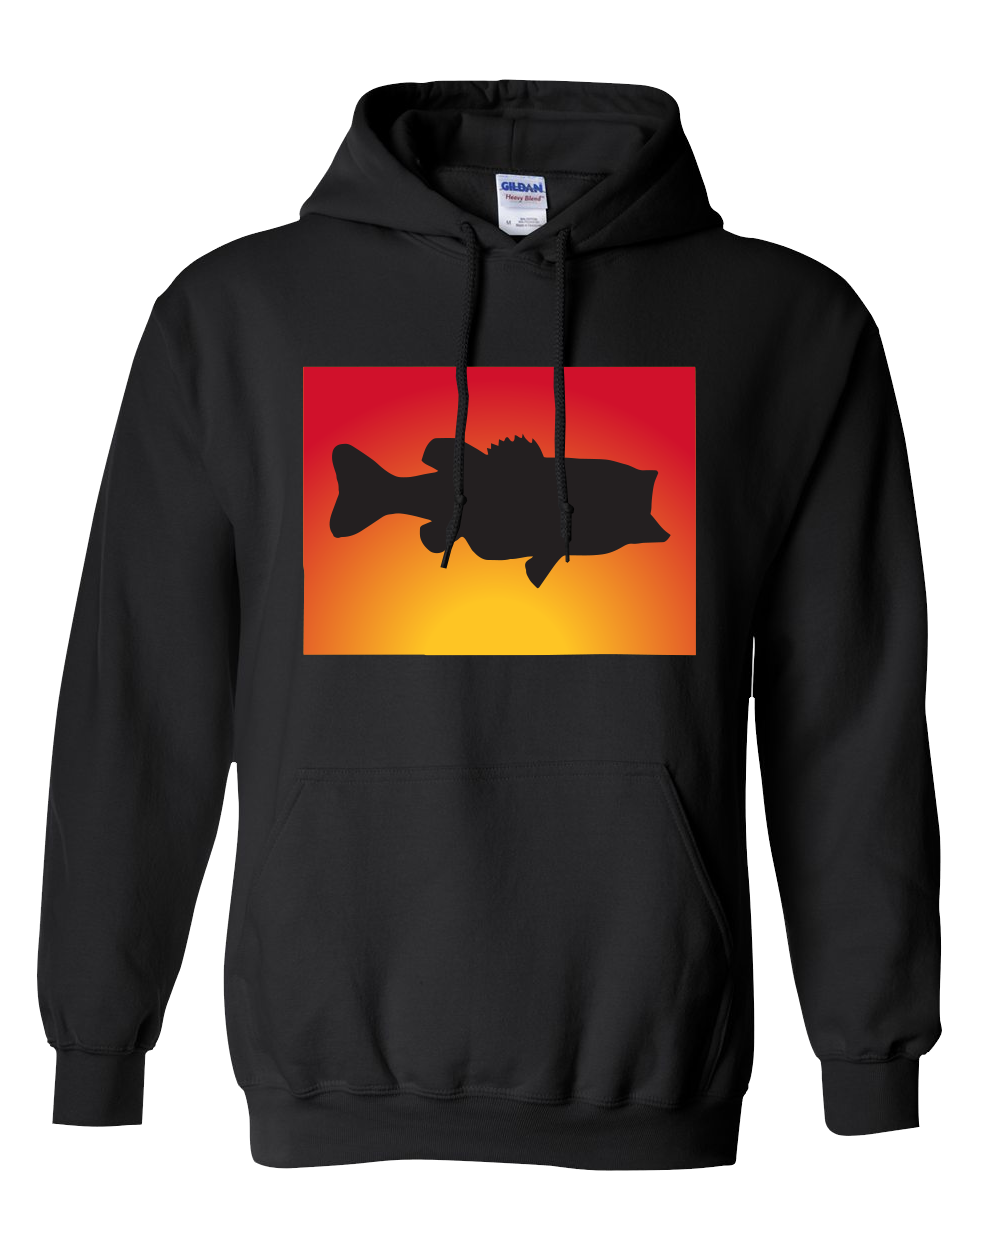 Pullover Hooded Sweatshirt Colorado Black Large Mouth Bass Vibrant Design High Quality Tight Knit Ring Spun Low Maintenance Cotton Printed With The Newest Available Color Transfer Technology